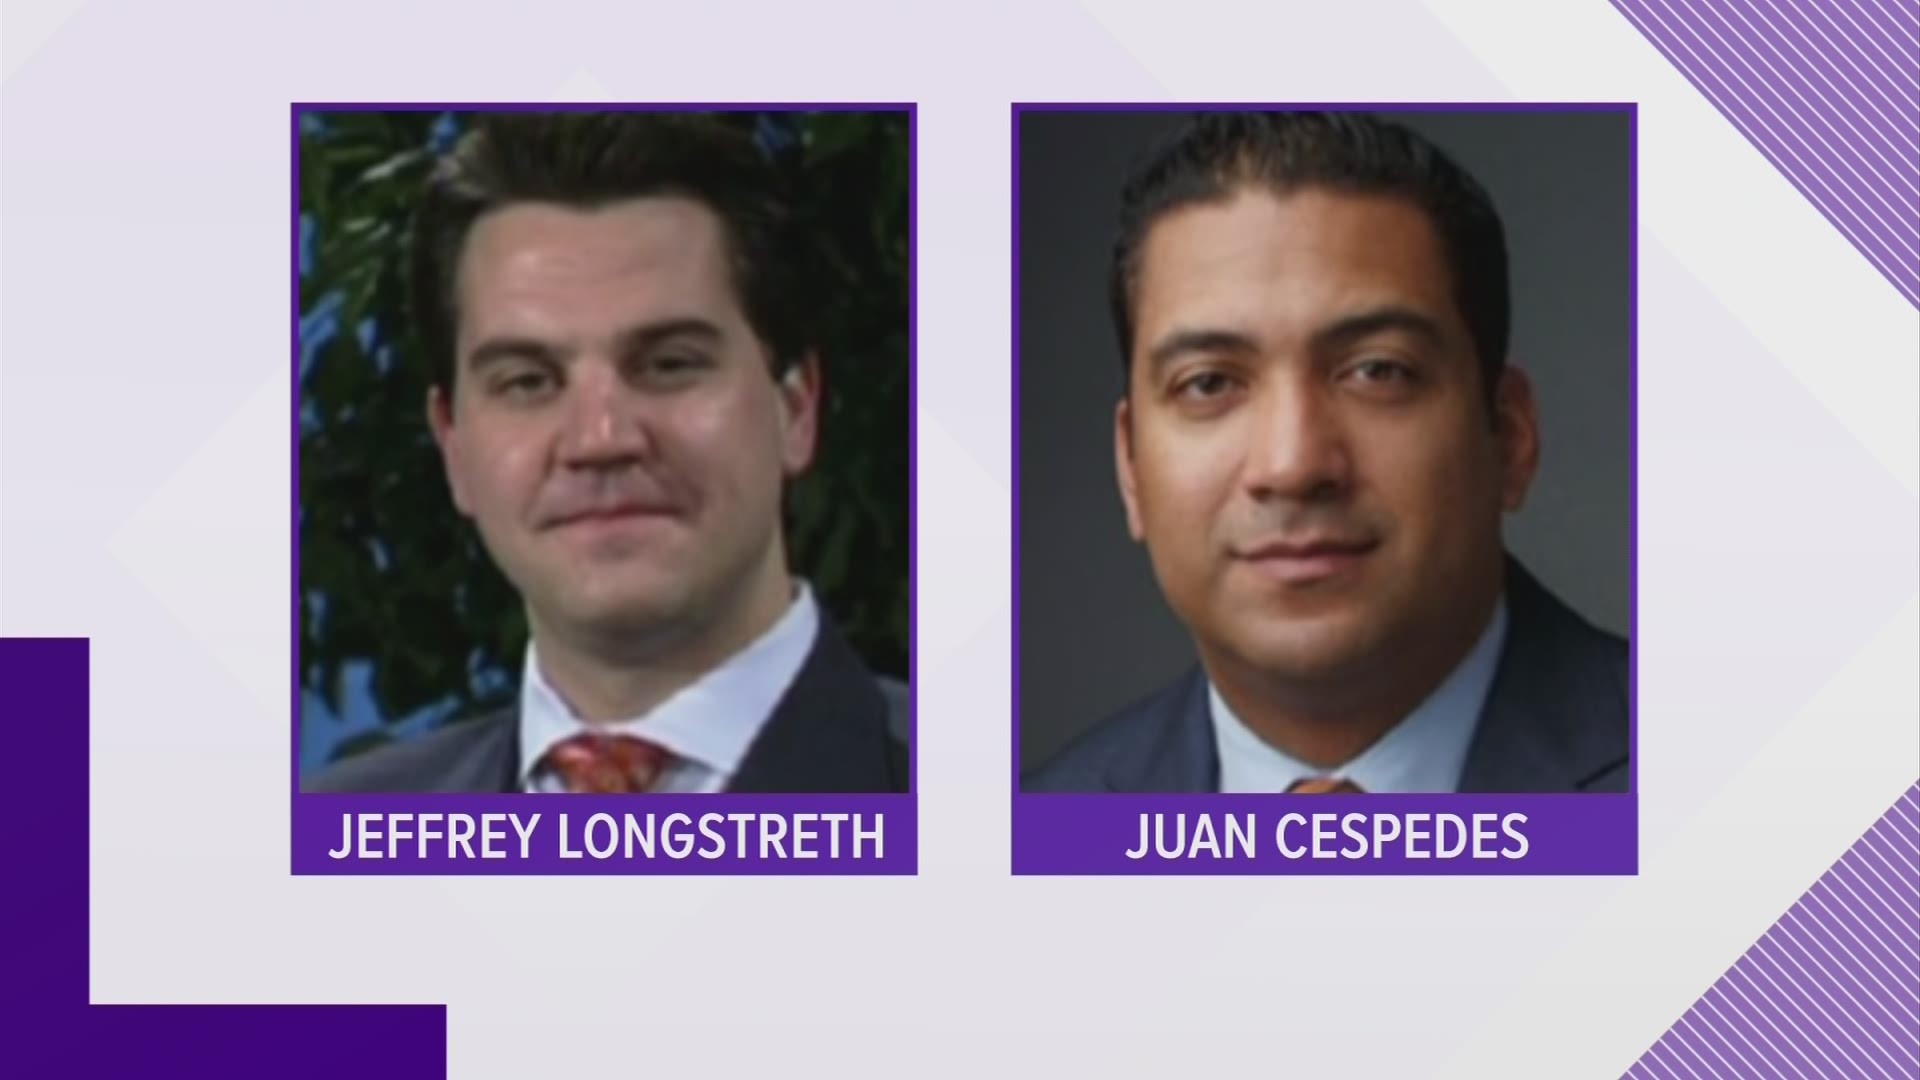 Jeffrey Longstreth and Juan Cespedes have decided to change their pleas and are expected to plead guilty to federal racketeering charges.